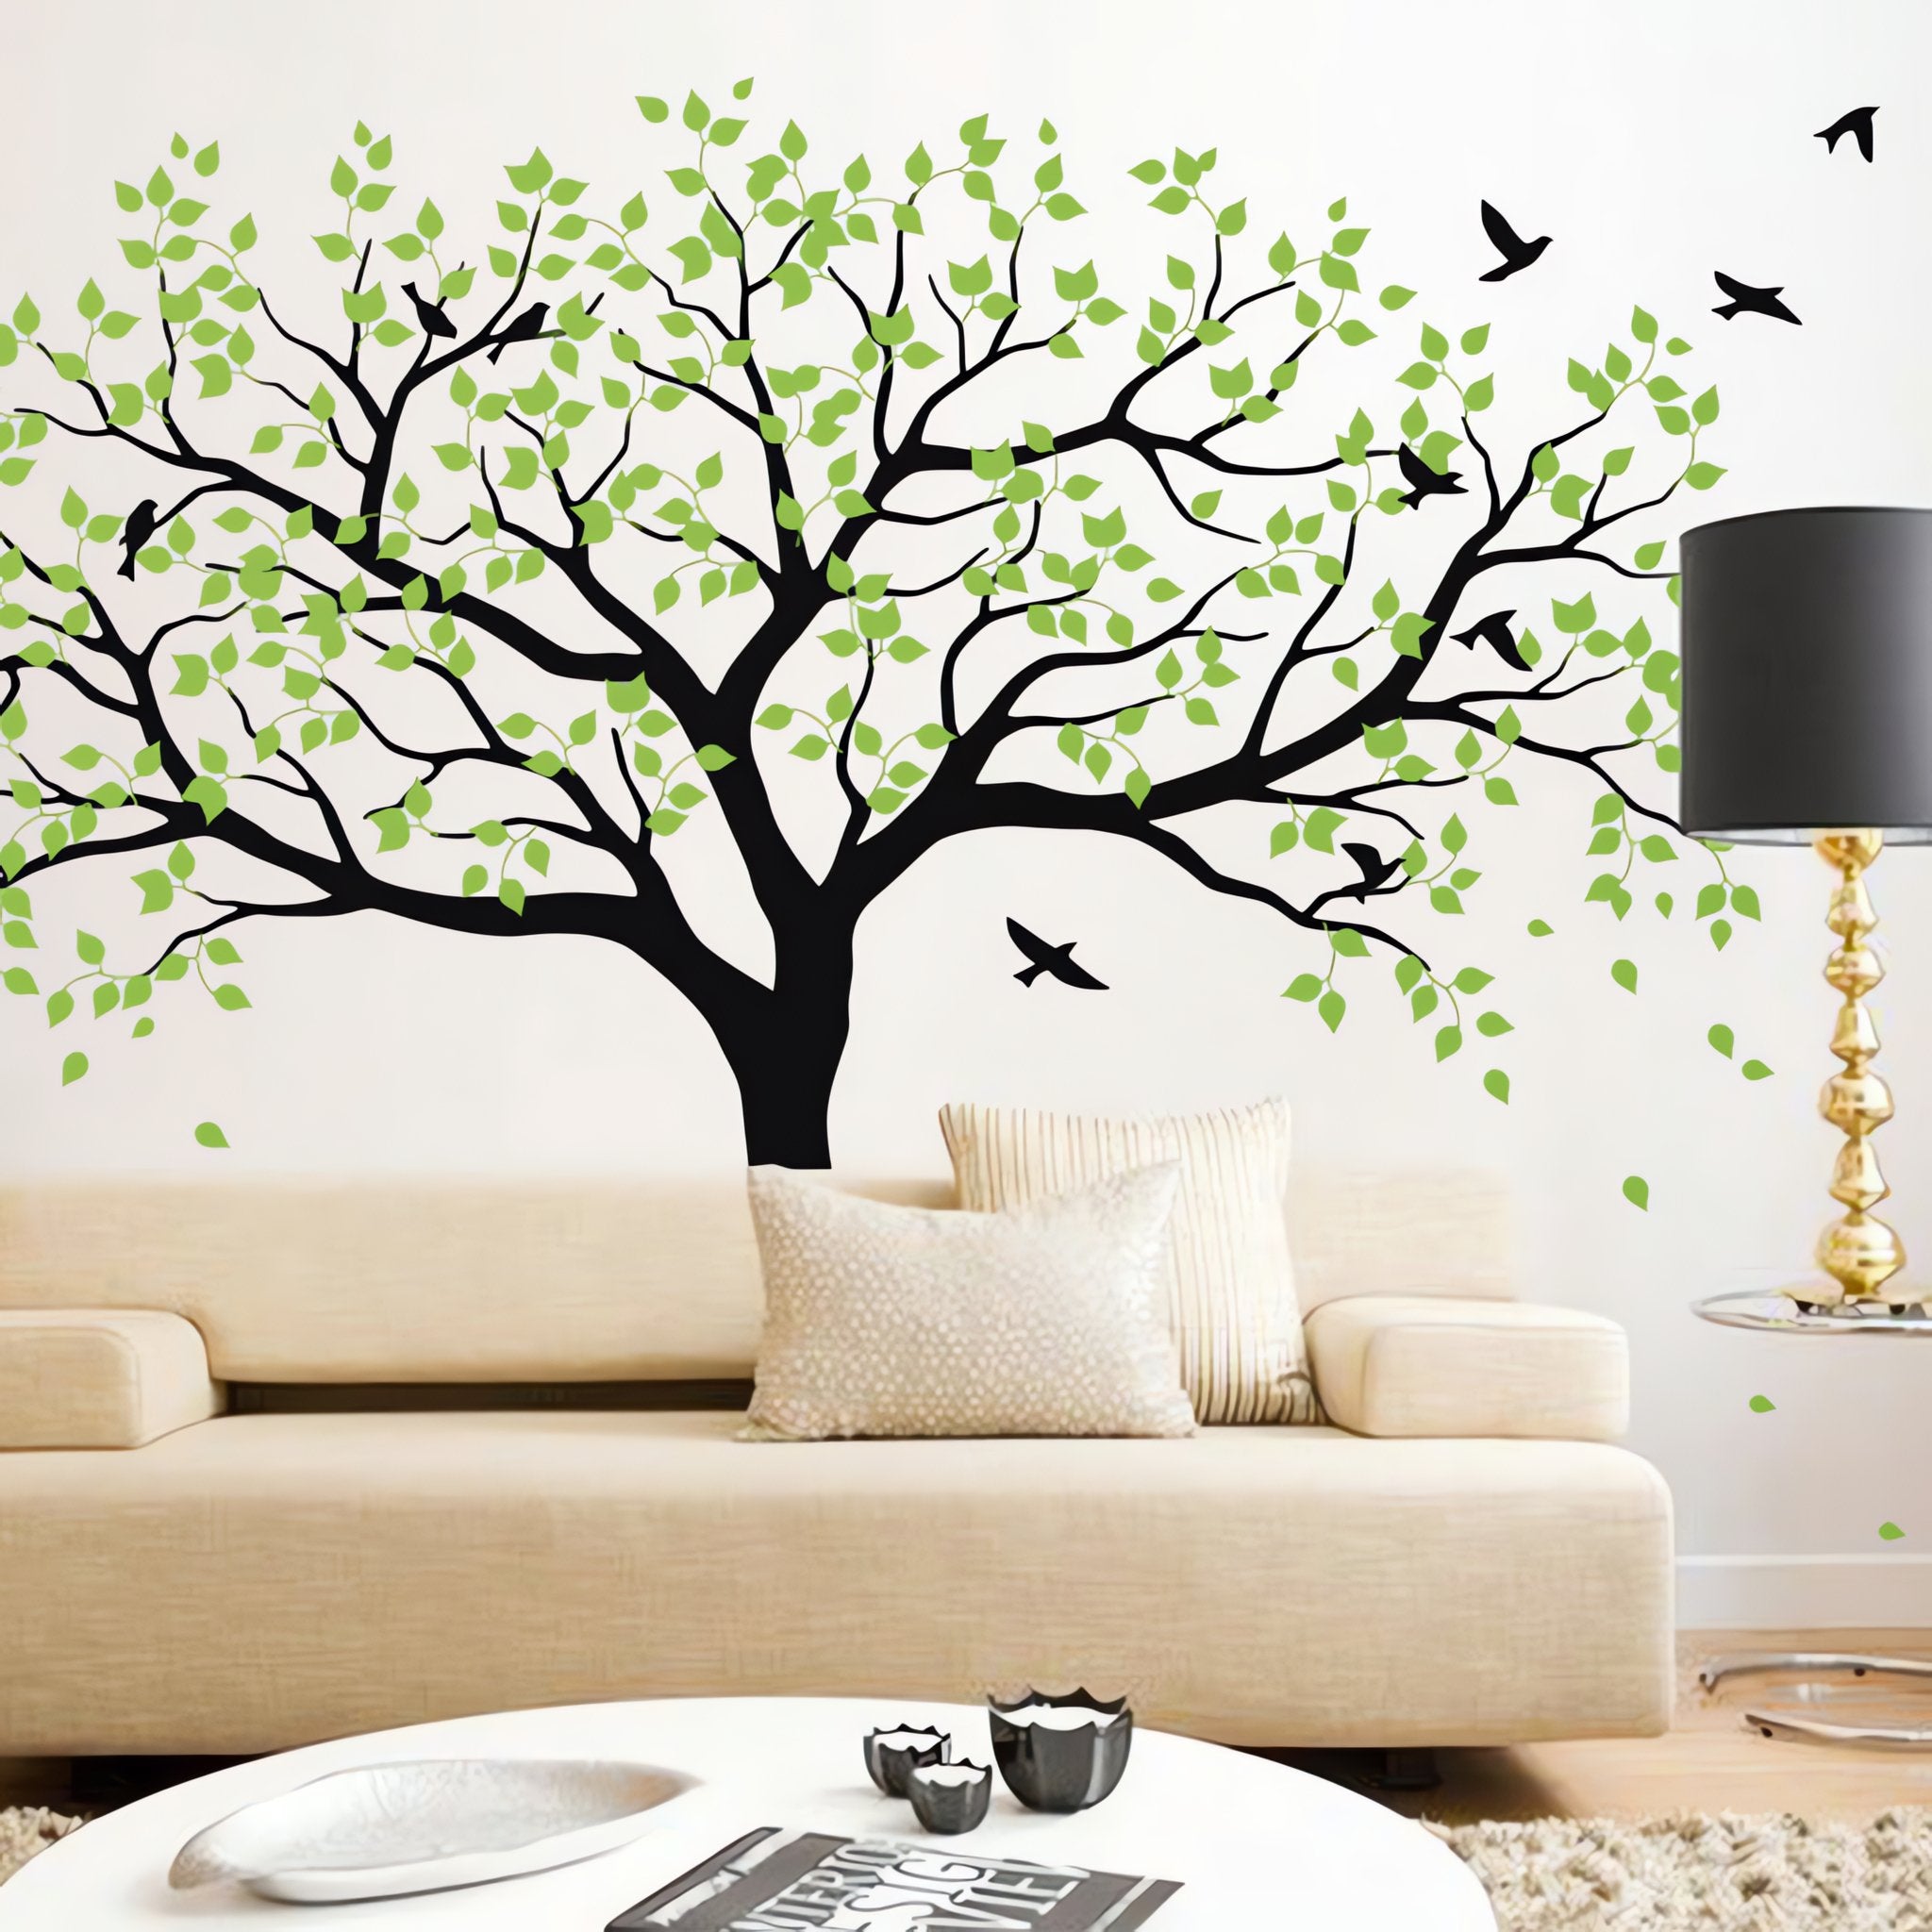 Large tree wall sticker with birds in a living room with a couch, coffee table and lamp.